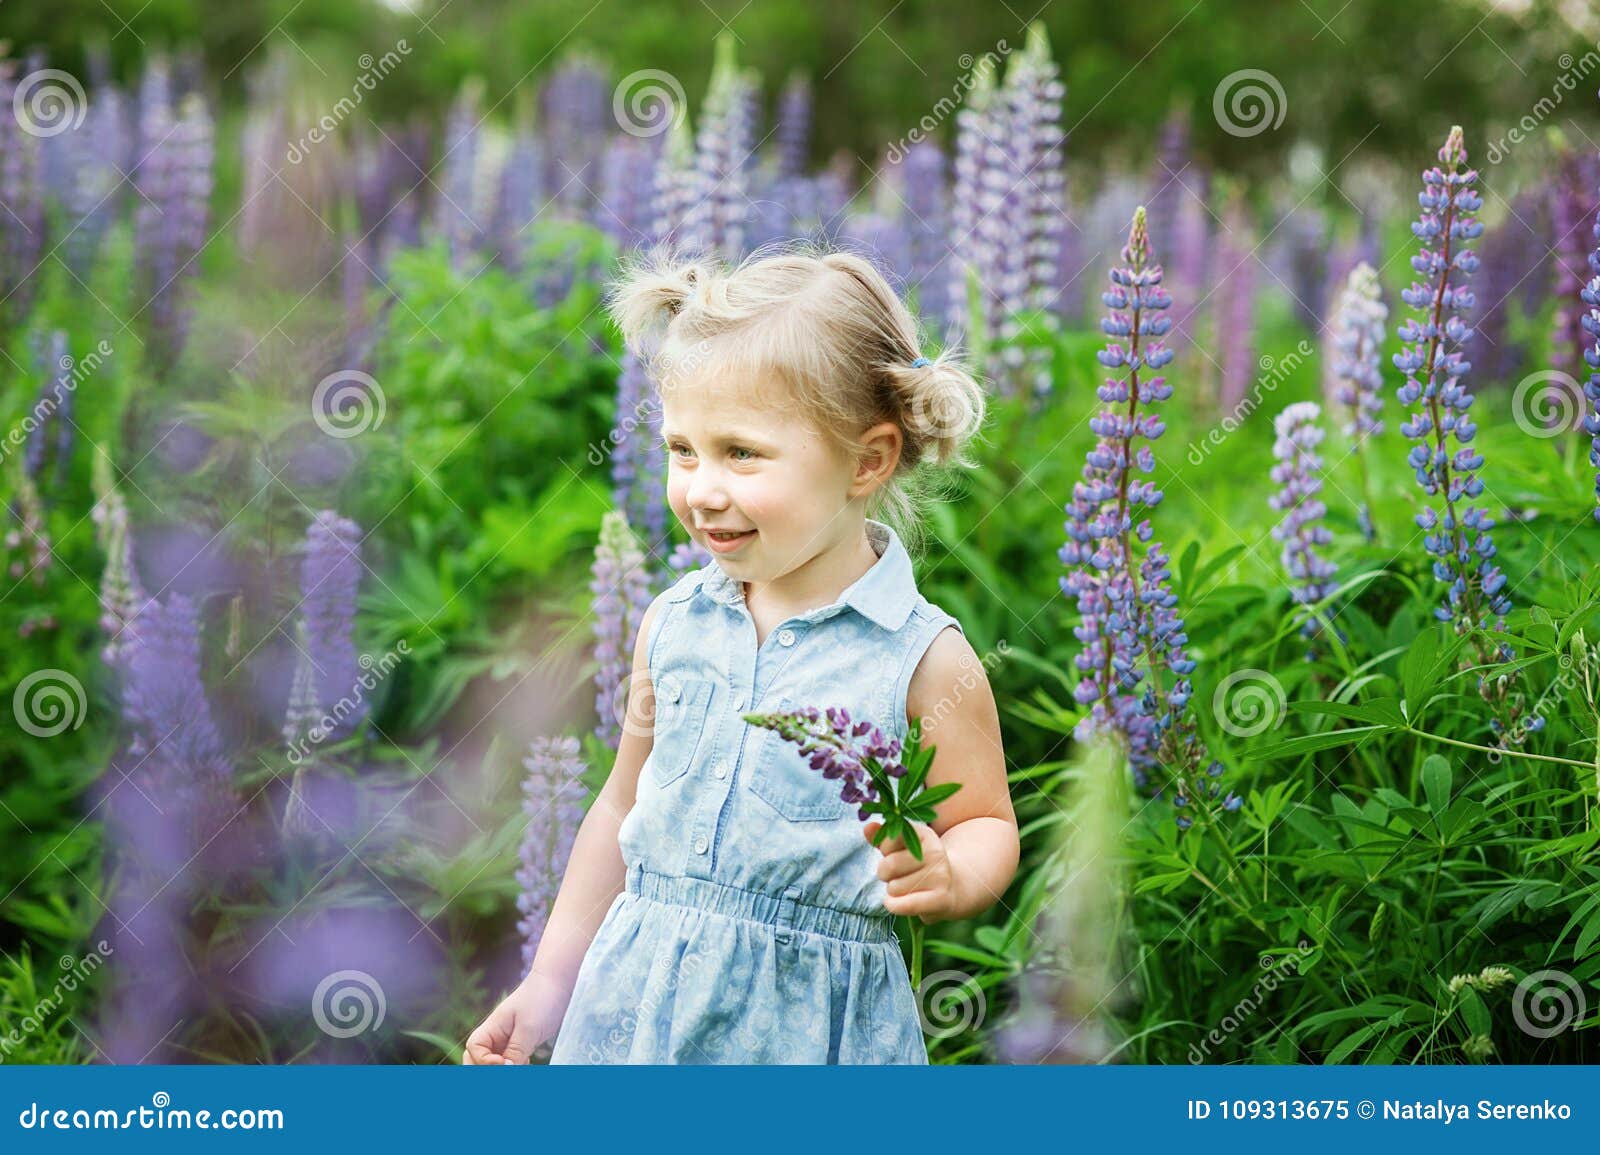 Beautiful Girl in Blue Dress Holding a Lupine at Sunset on the Field ...